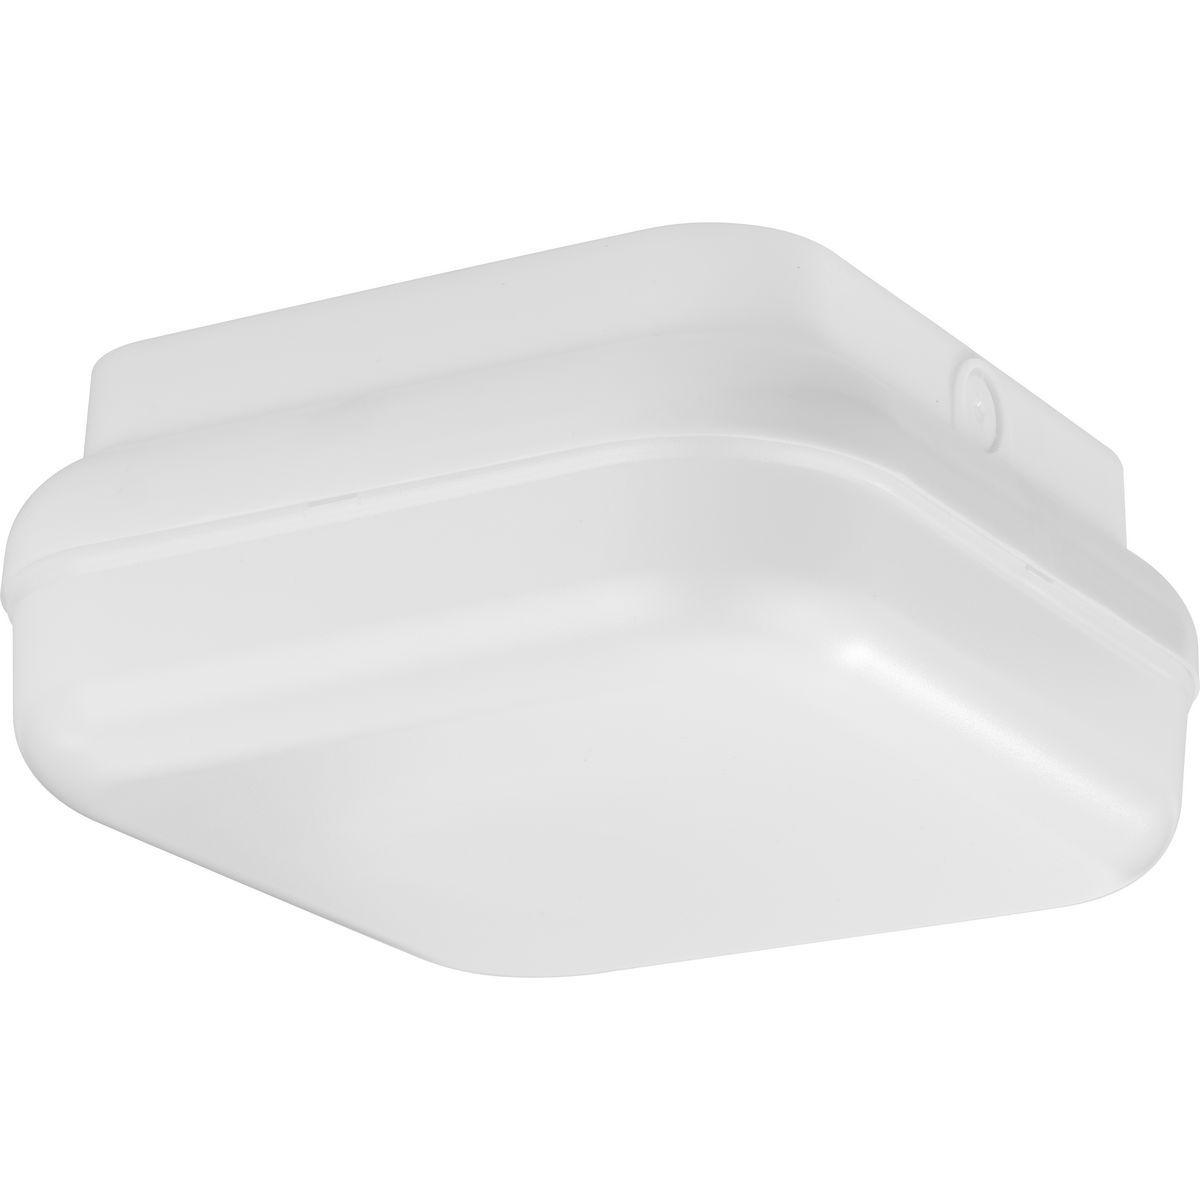 Hard Nox 10 in. Square LED Outdoor Flush Mount